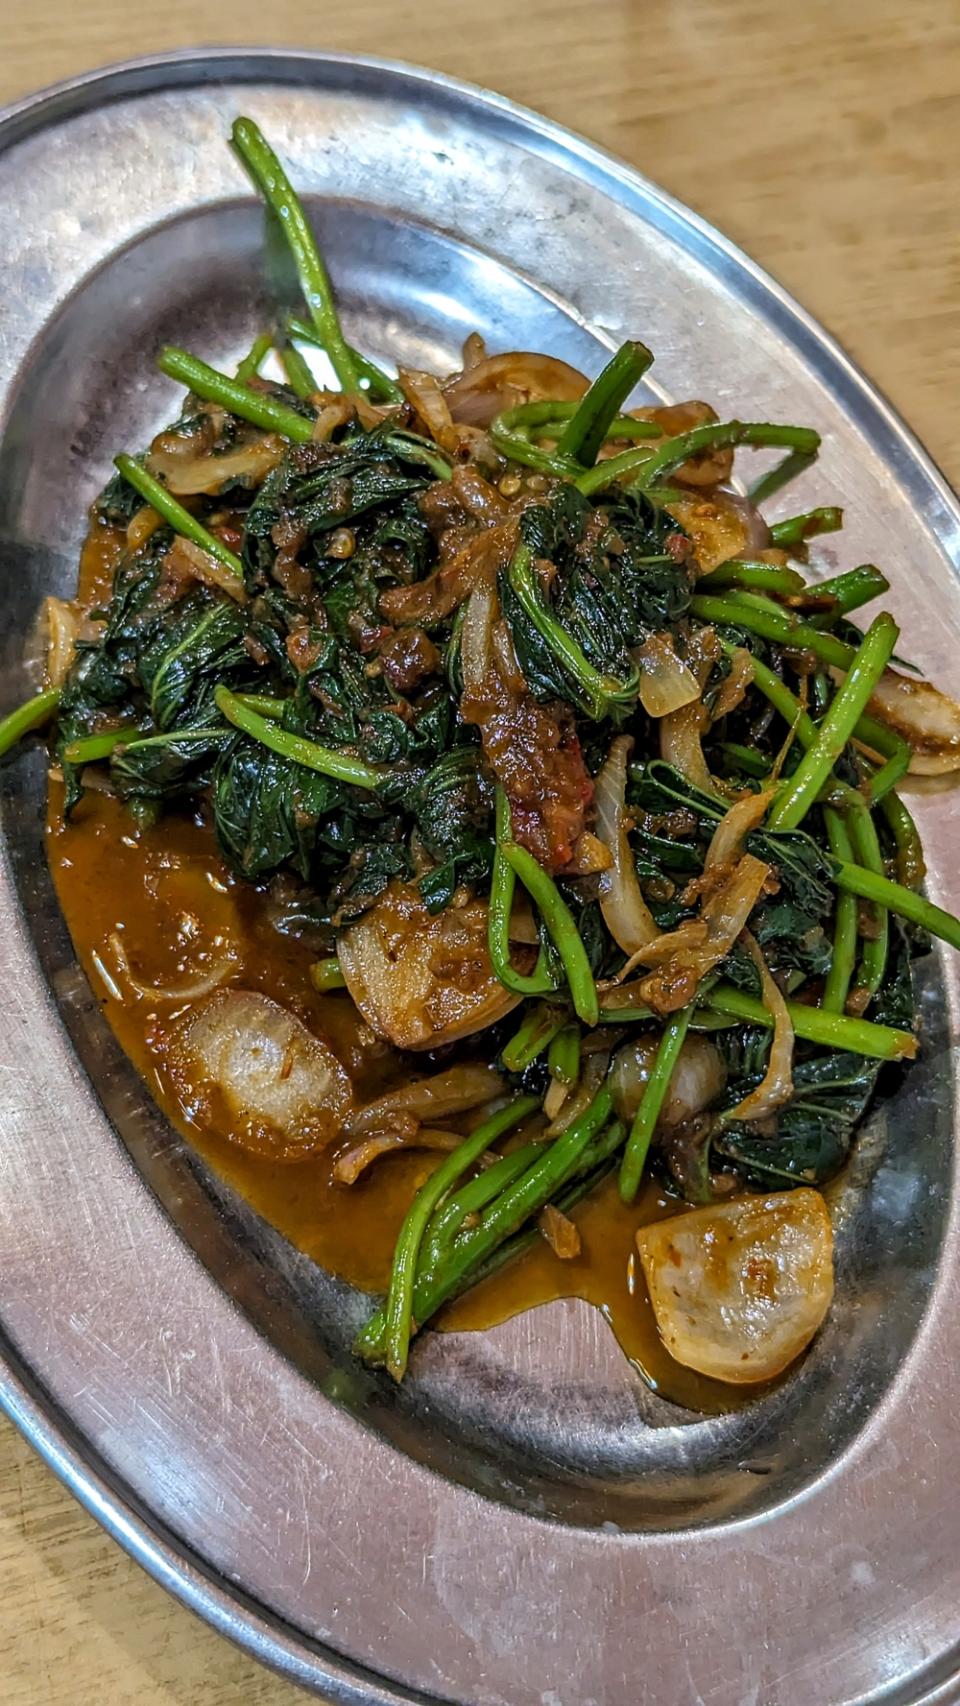 Just an outstanding plate of Belacan Stir Fried Sweet Potato Leaves.